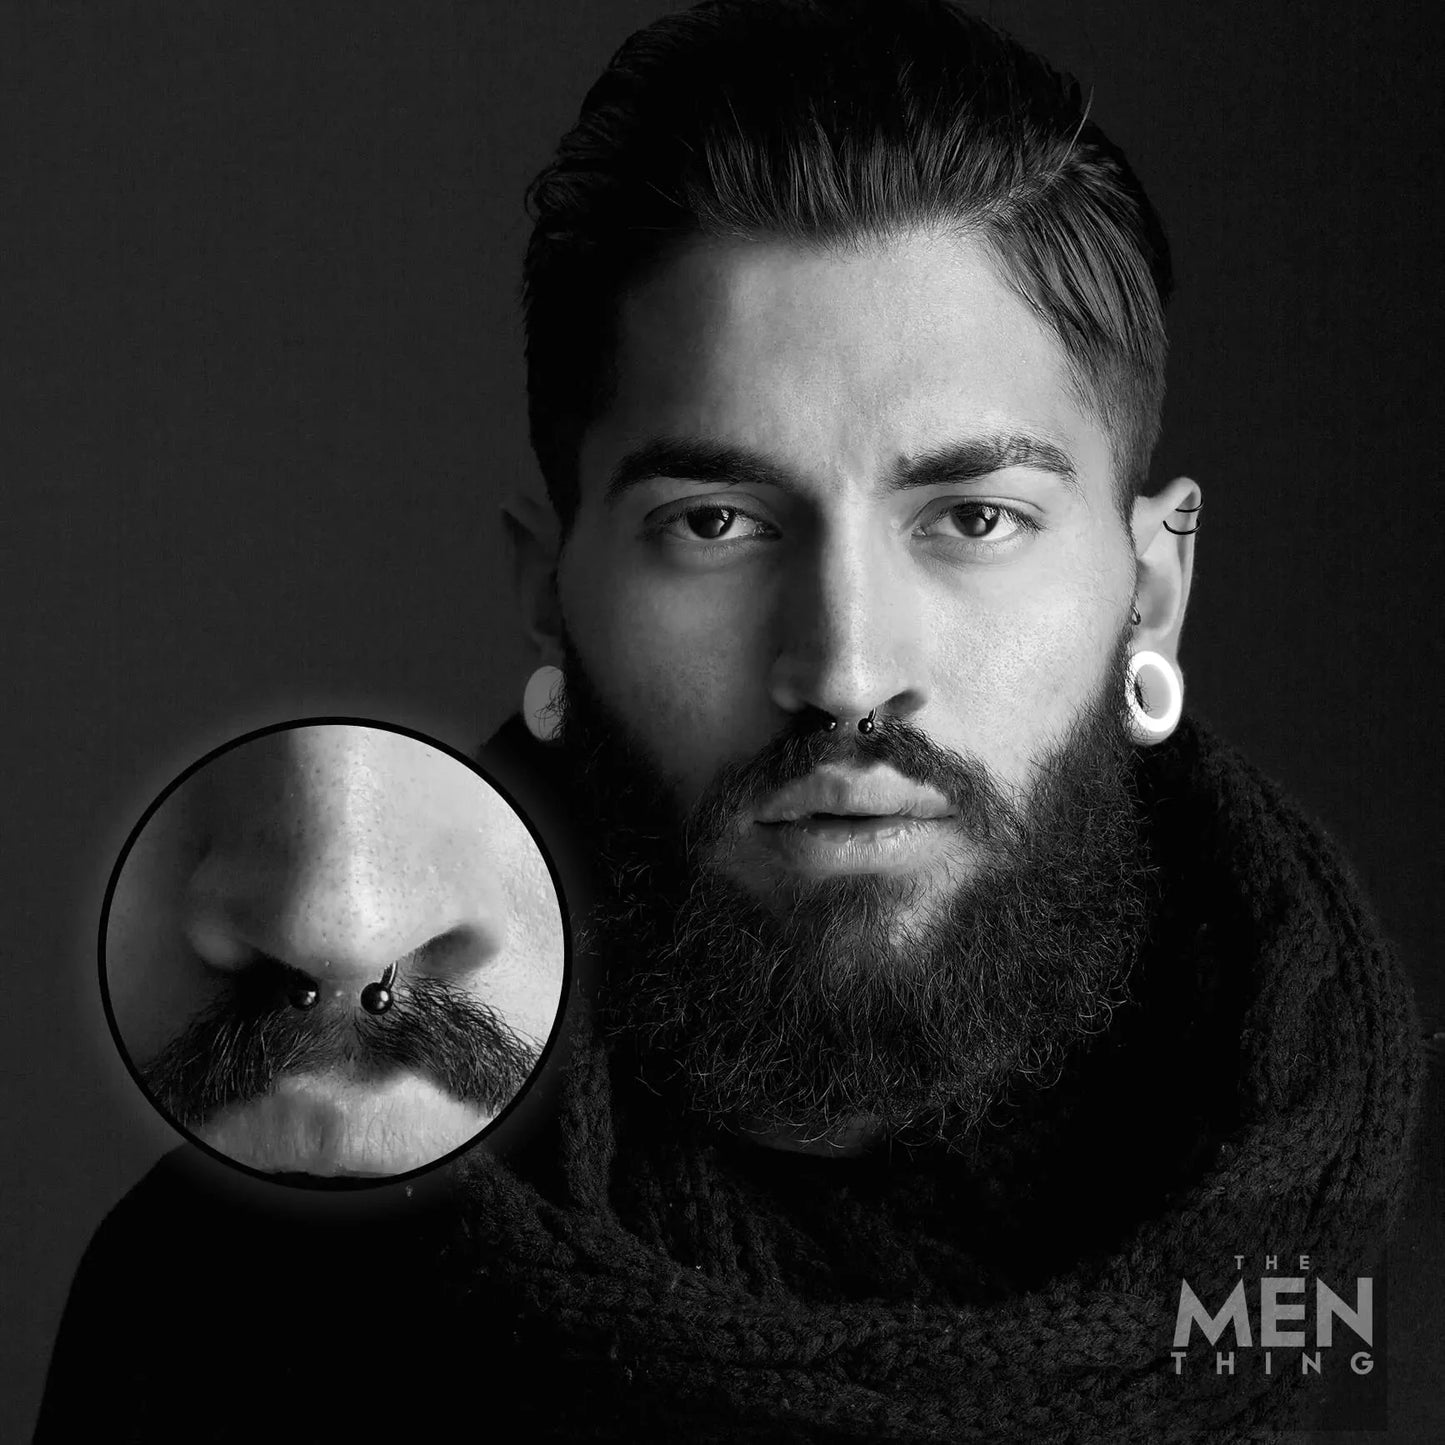 THE MEN THING Fake Nose Rings – Pure Stainless Steel Non Piercing Fake Cartilage Earring - Faux Nose Ring for Men and Boys